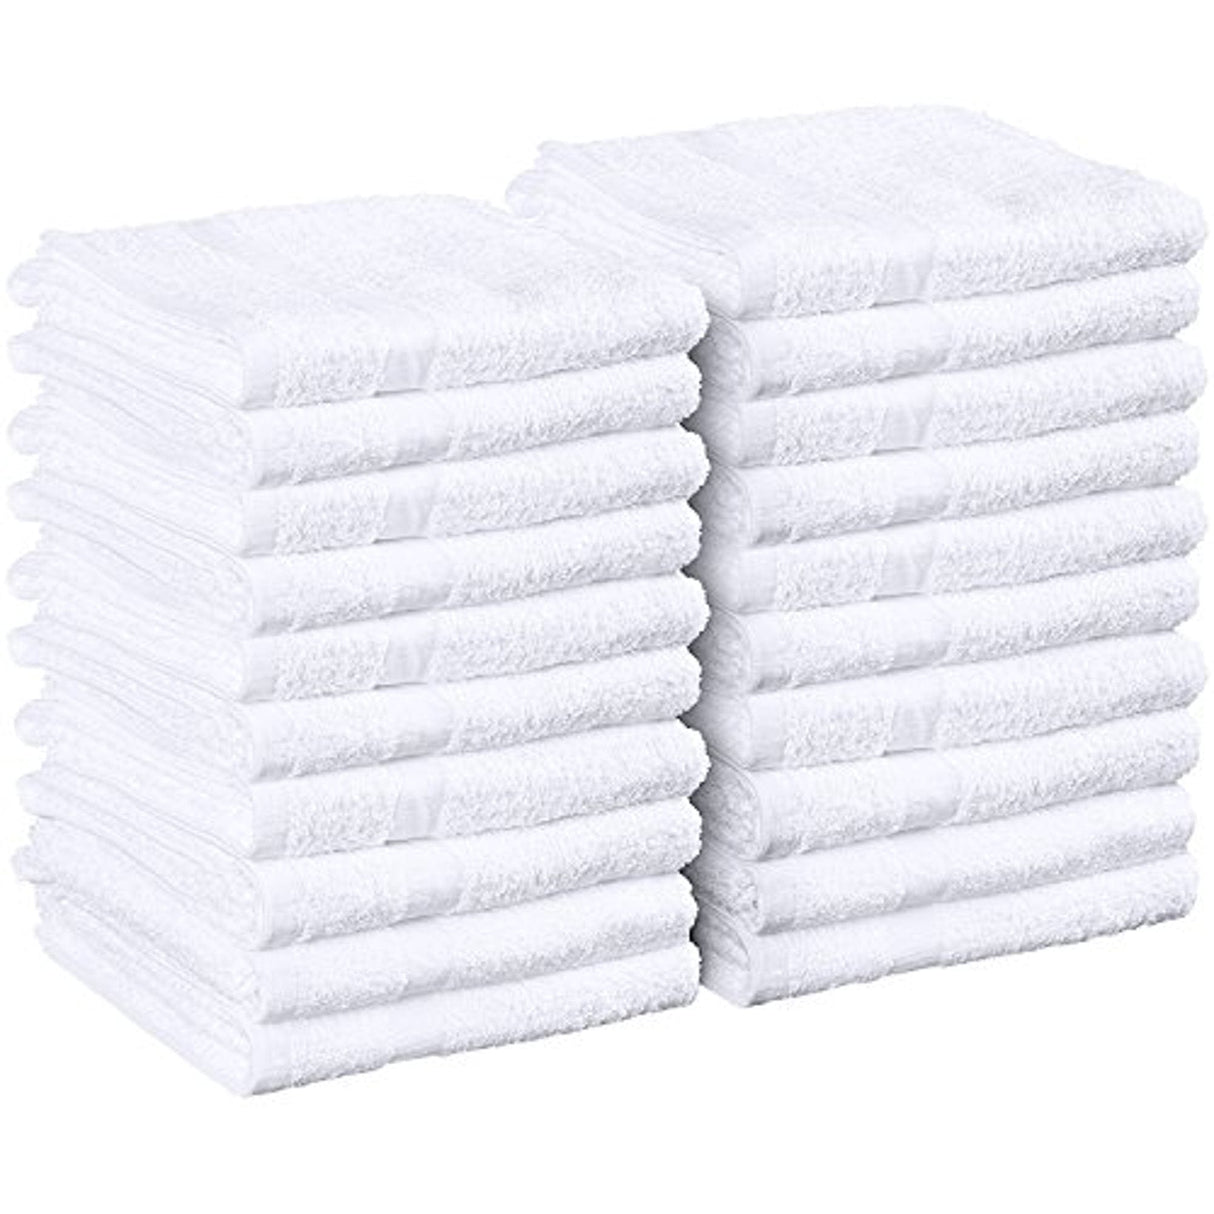 Allure 29 100% Cotton Nail & Spa Towel 16 X 29, 12 Pack